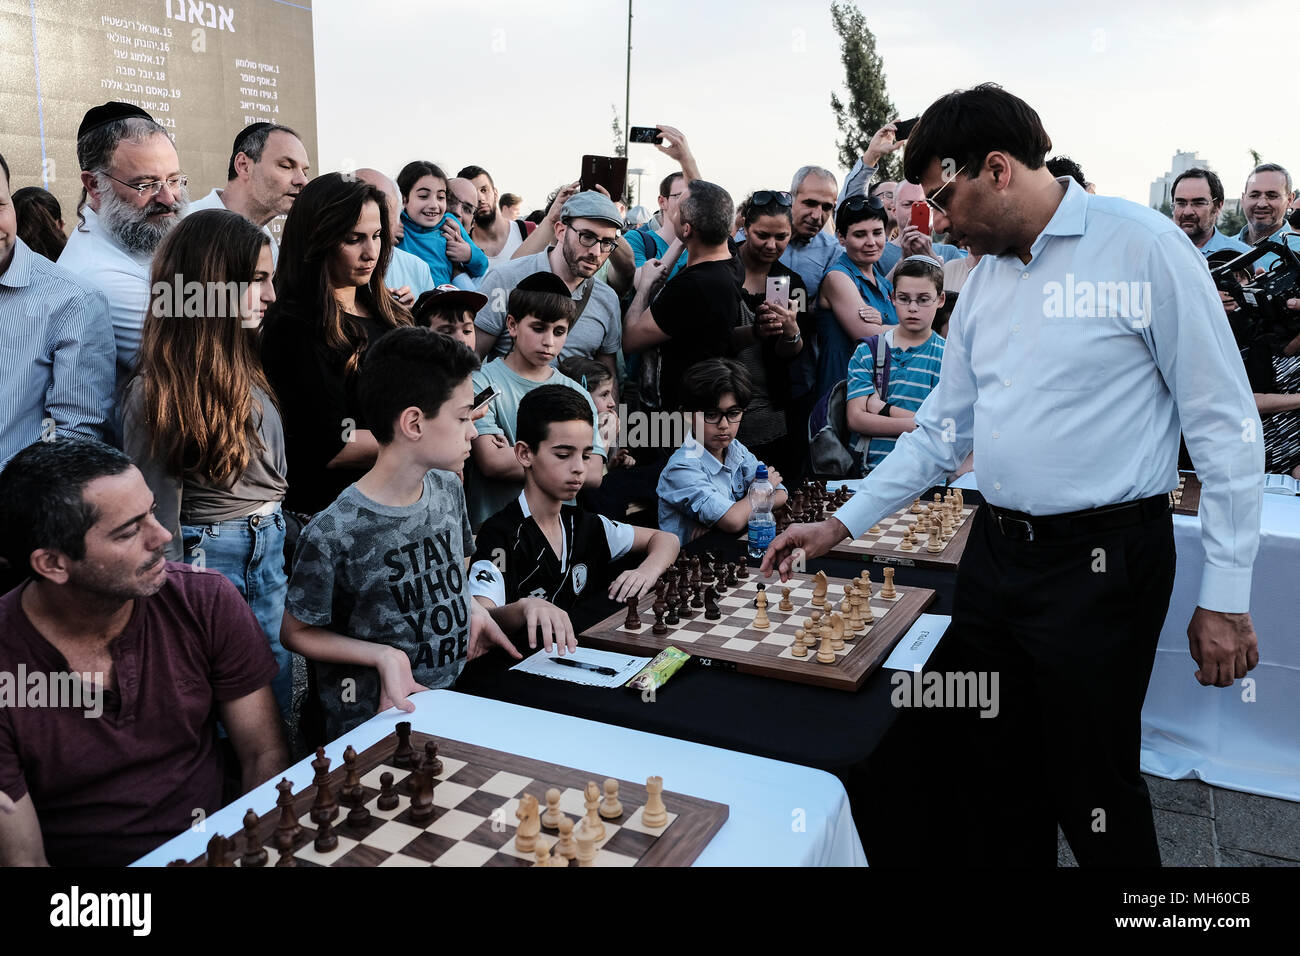 Jerusalem, Israel. 30th April, 2018. VISWANATHAN VISHY ANAND, 49, Indian chess grandmaster, plays chess against dozens of Israeli youth champions simultaneously at the Jaffa Gate in the framework of Israel's 70th Independence Day celebrations. Credit: Nir Alon/Alamy Live News Stock Photo